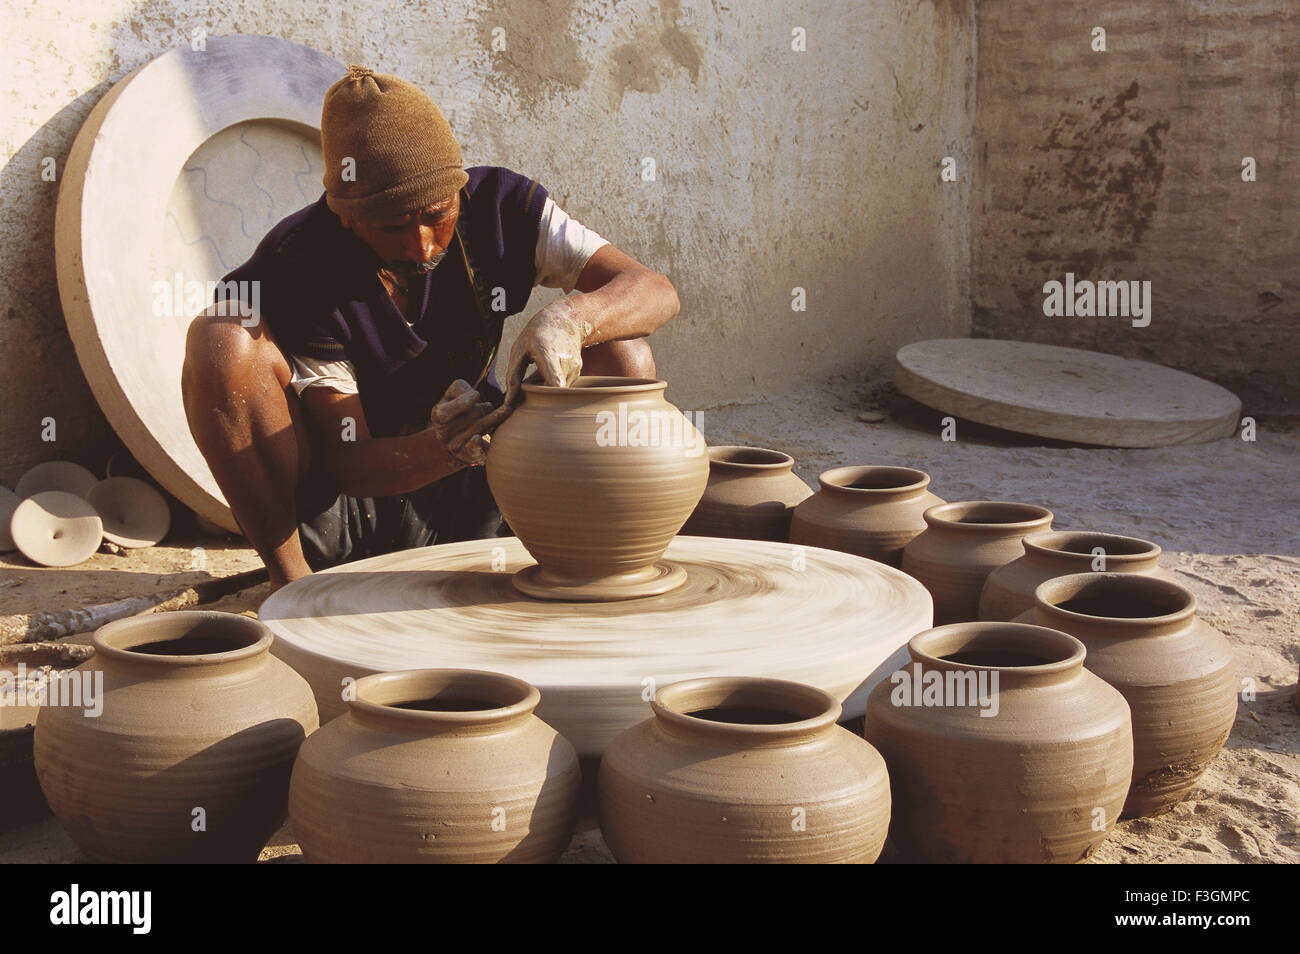 Premium Photo  Potter making a clay object on pottery wheel in